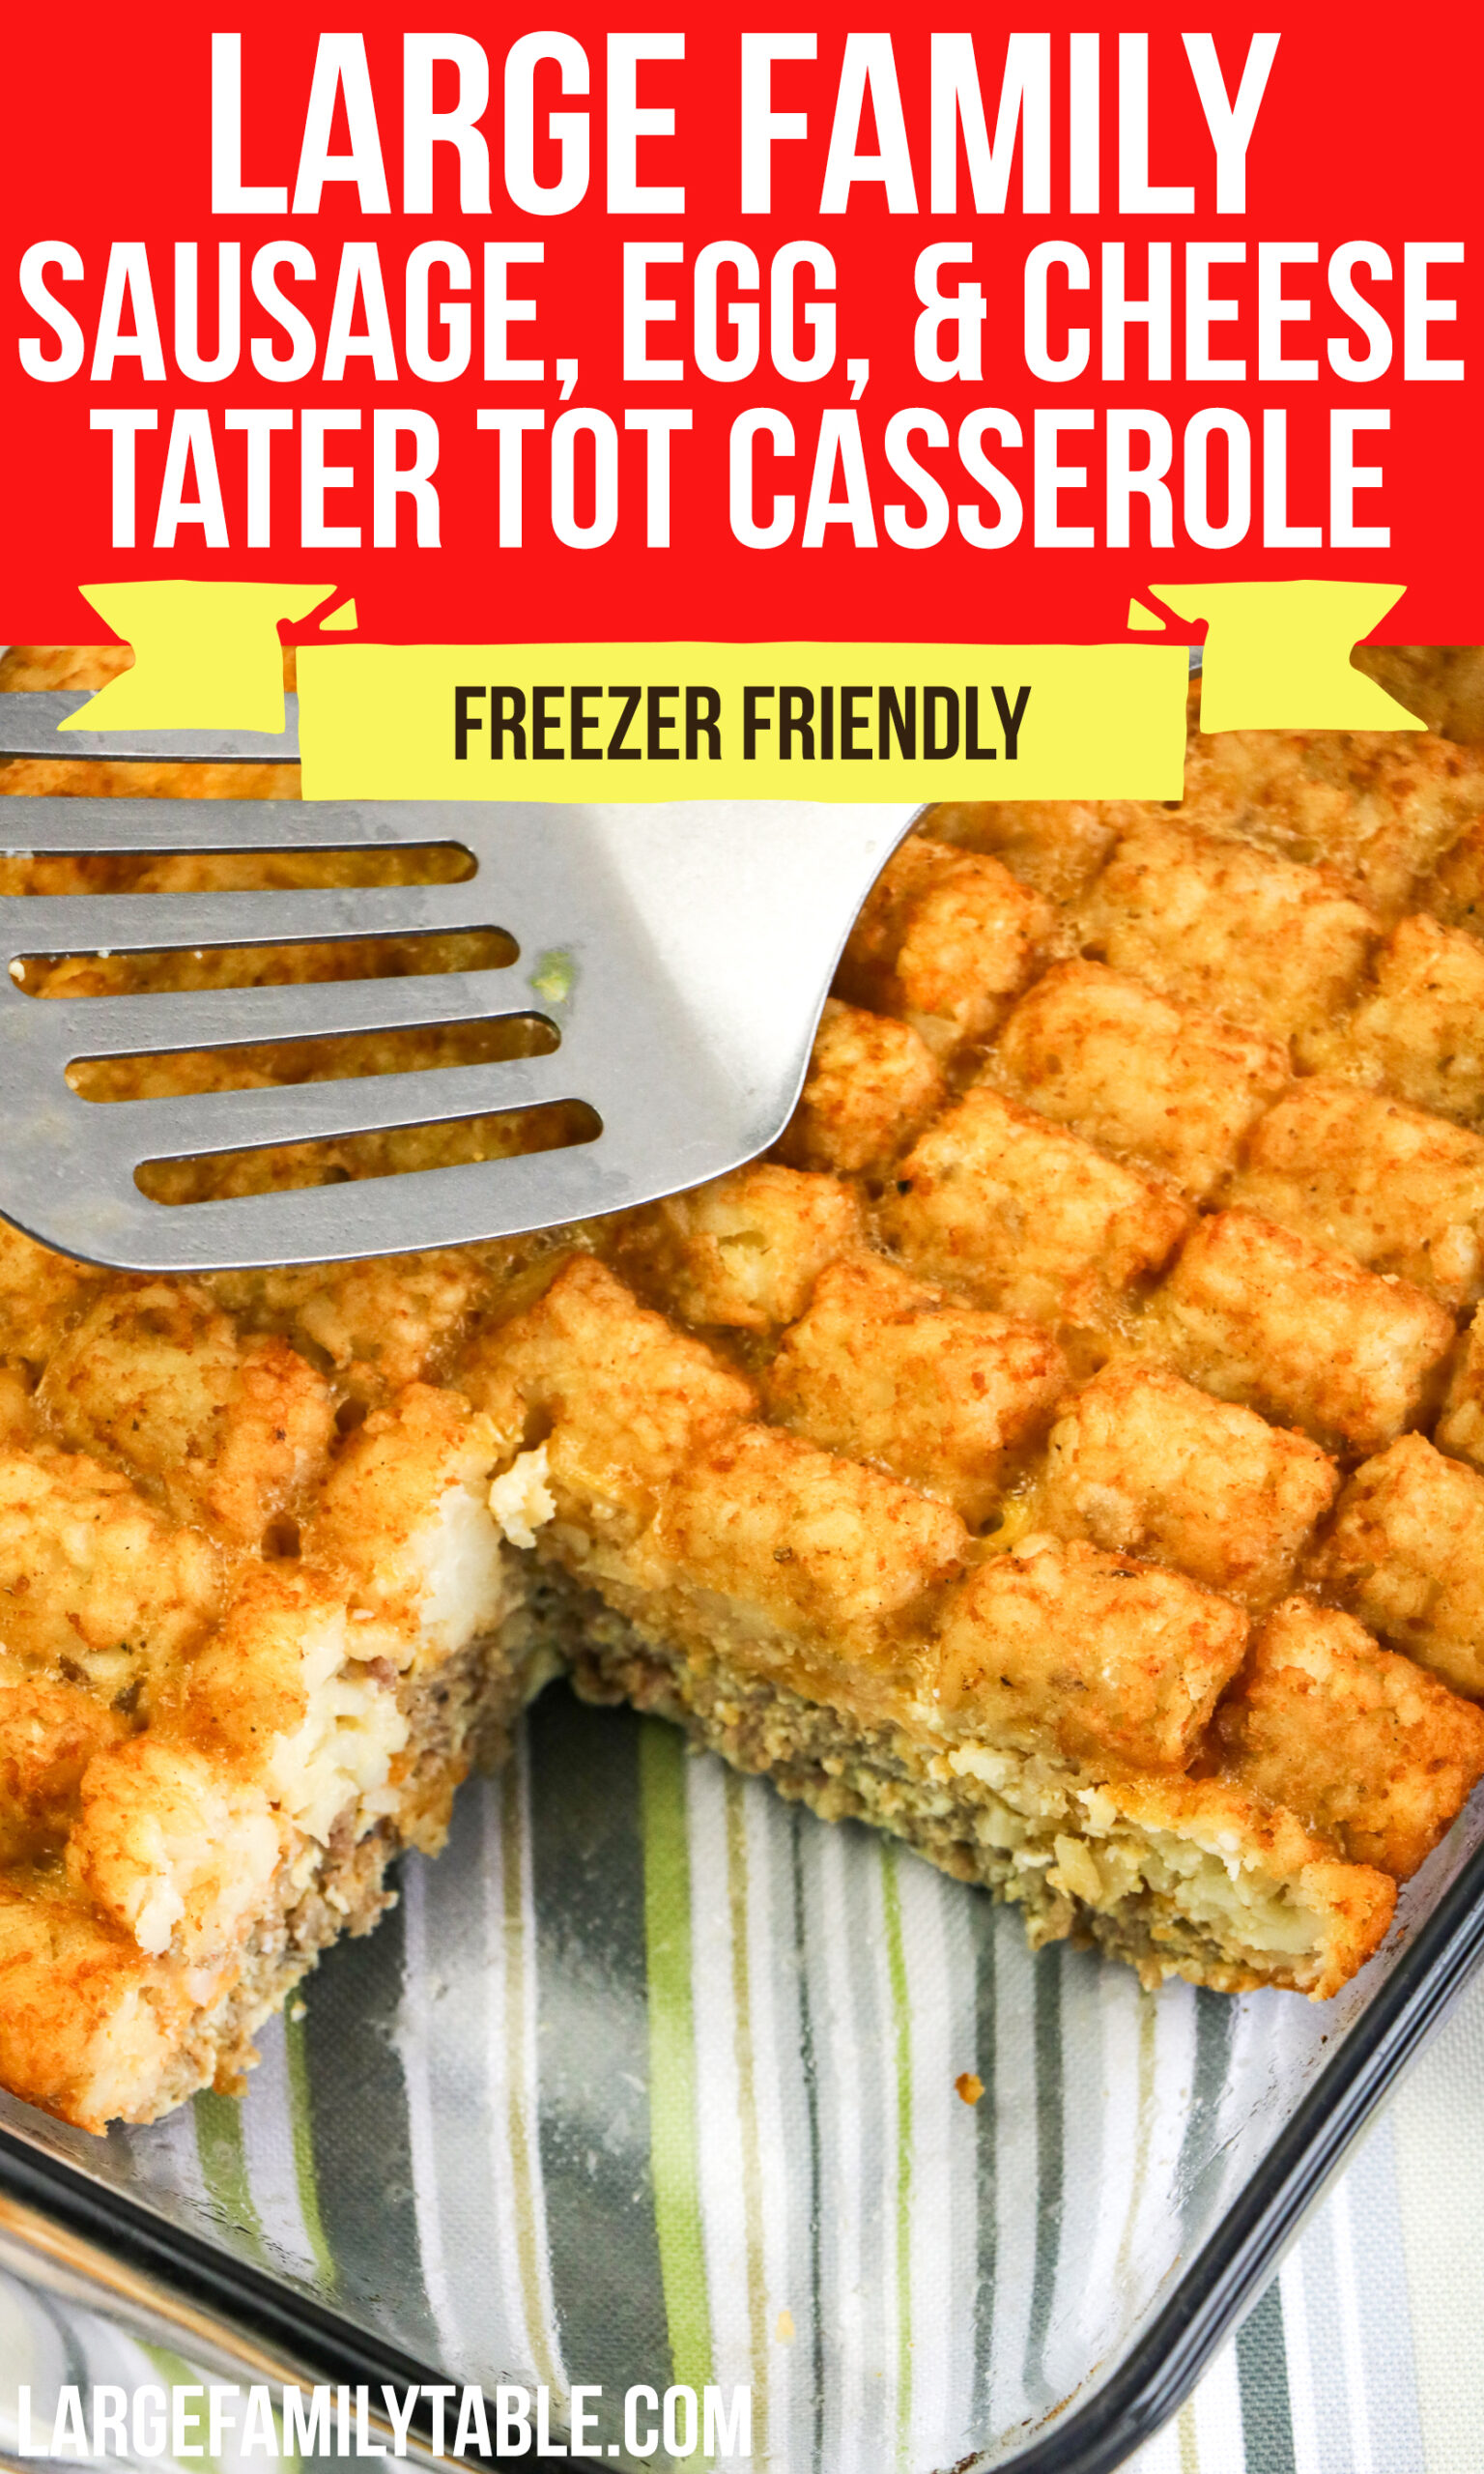 Large Family Sausage, Egg, and Cheese Tater Tot Casserole